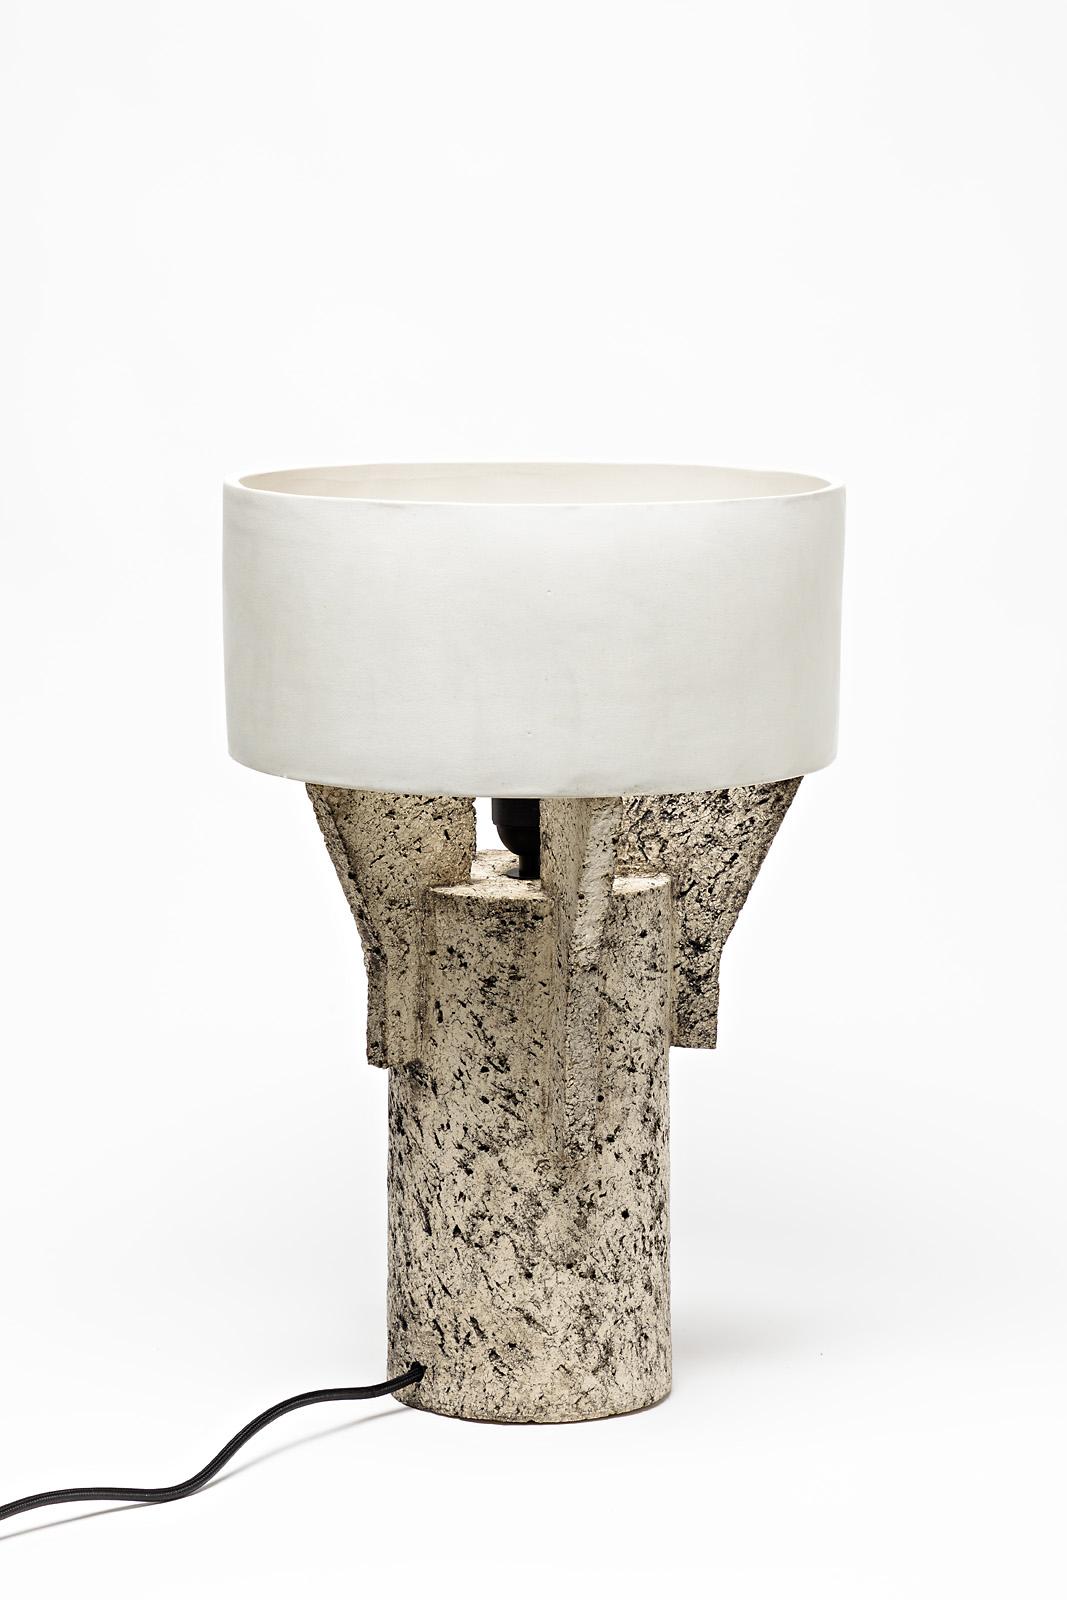 French Ceramic Table Lamp by Denis Castaing with White Glaze Decoration, 2019 For Sale